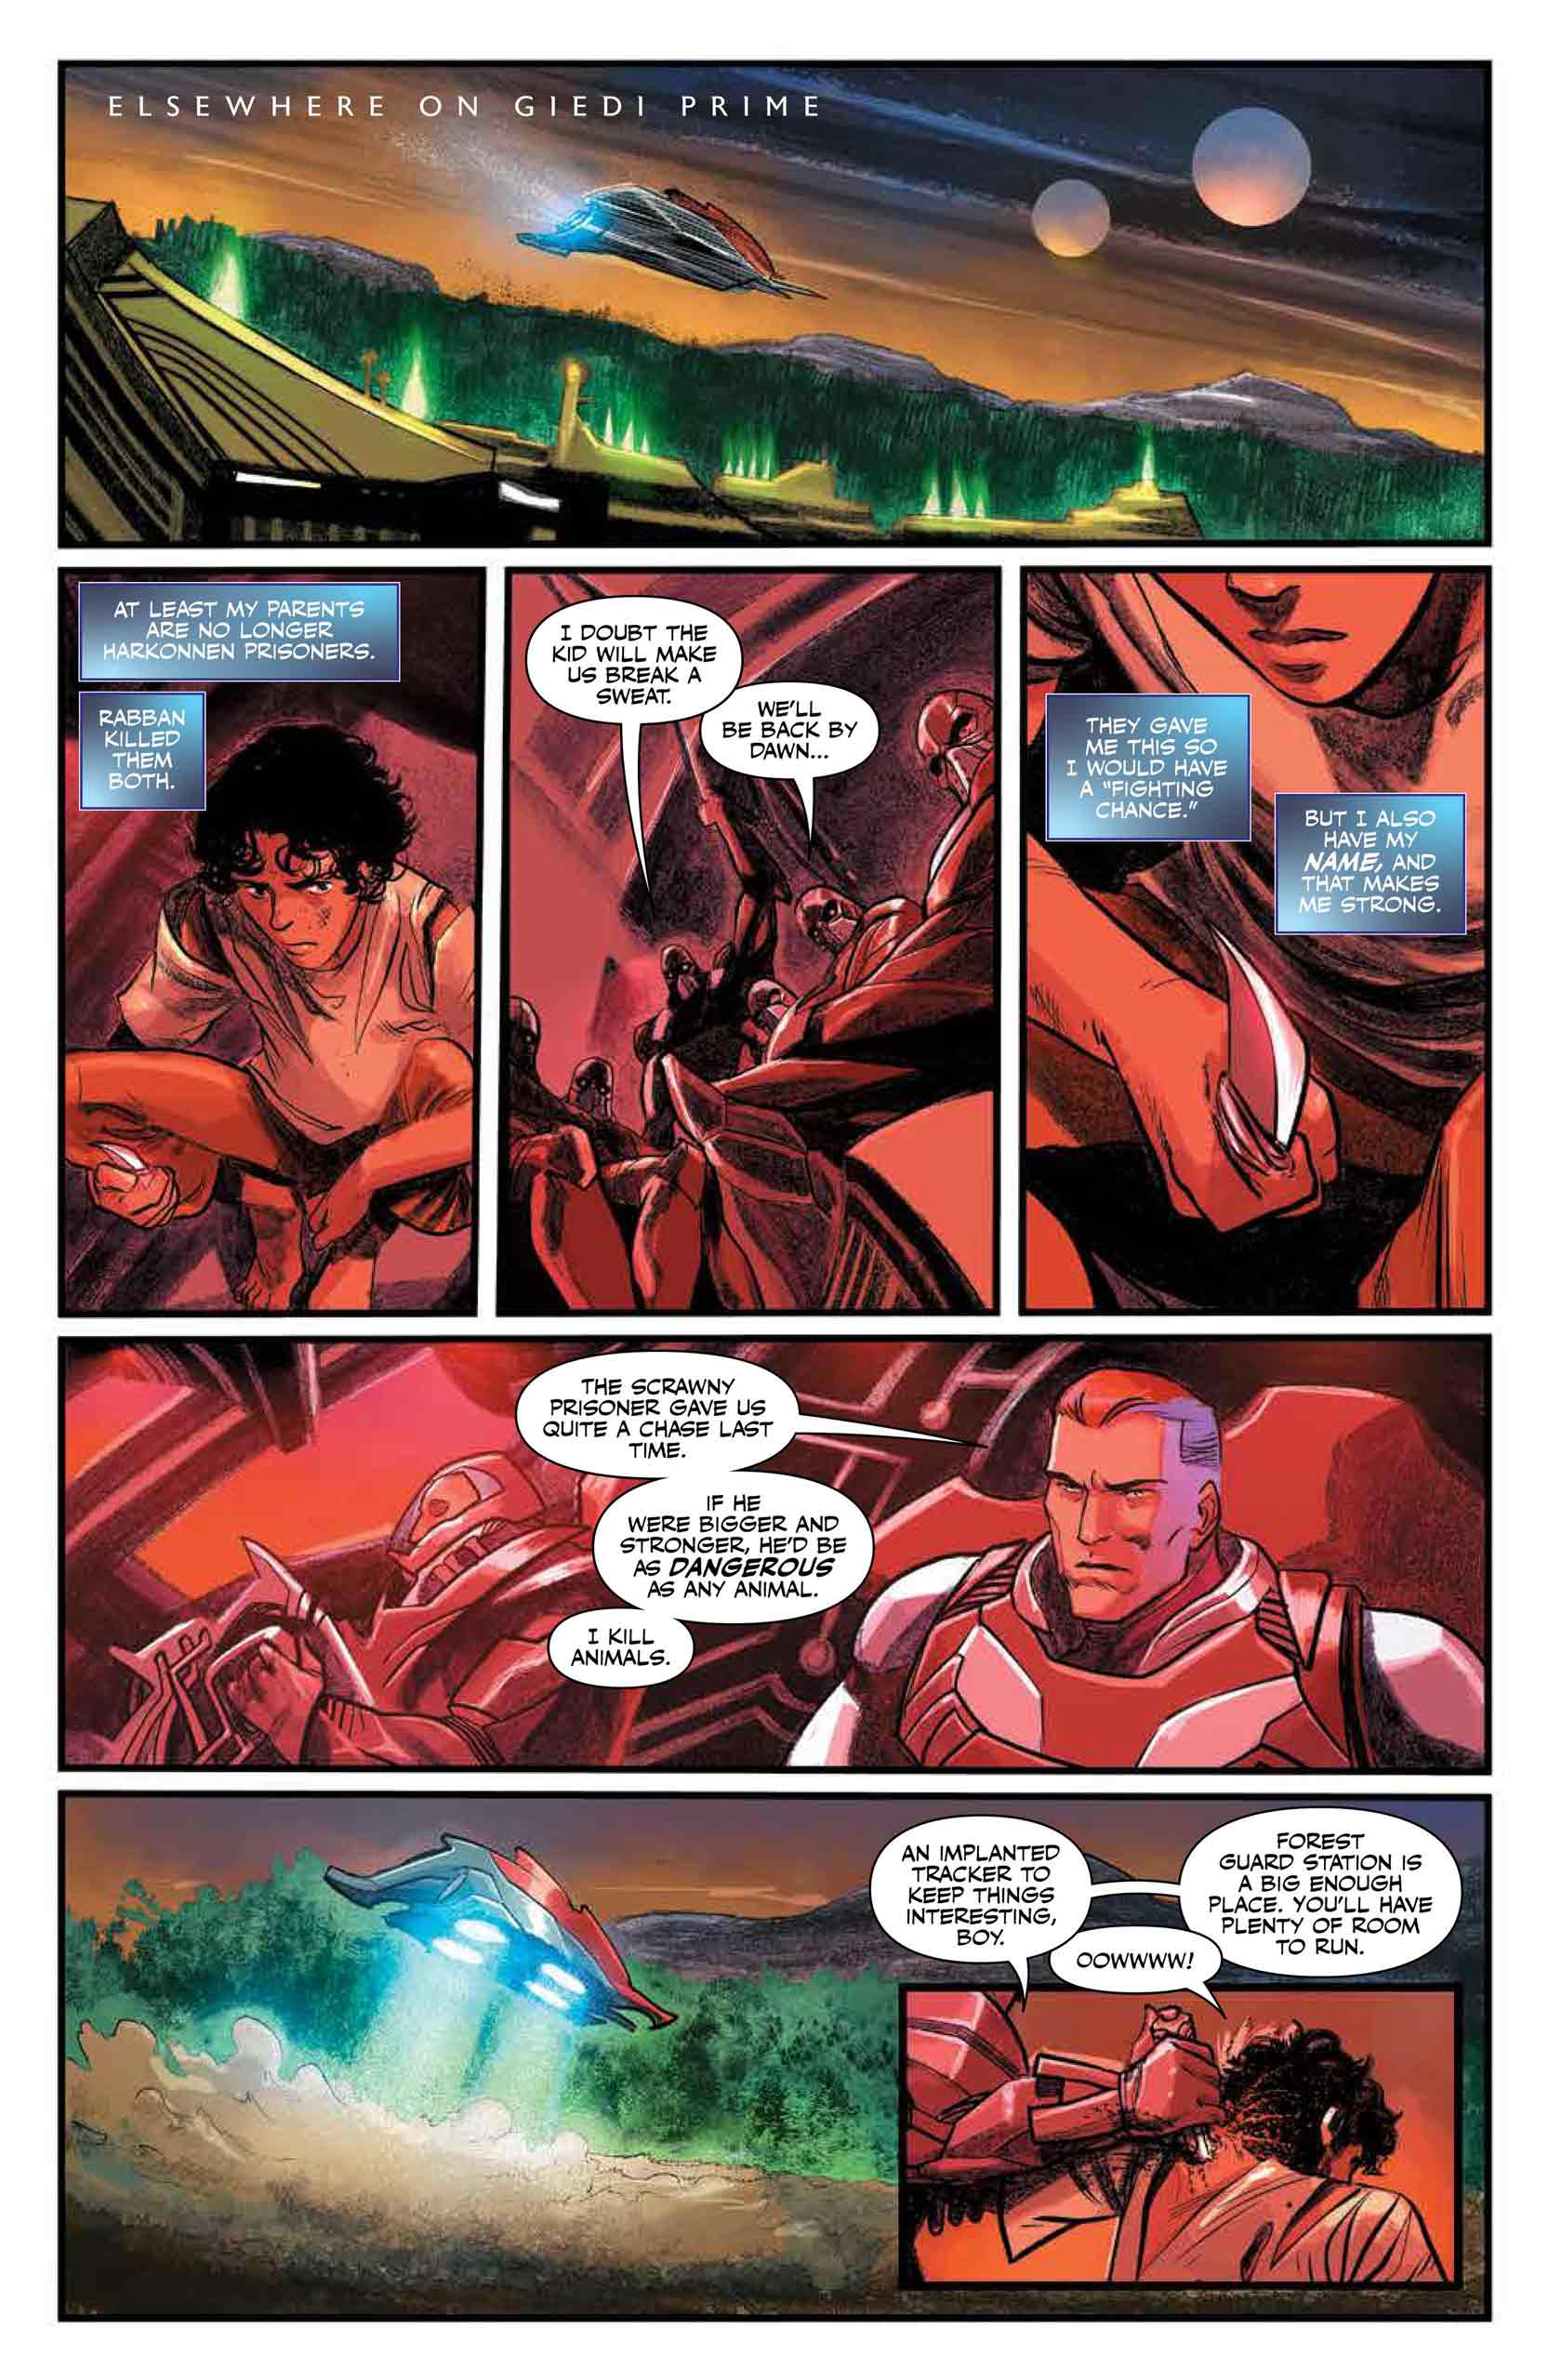 Dune: House Atreides comic series. Issue #3, preview page 5.